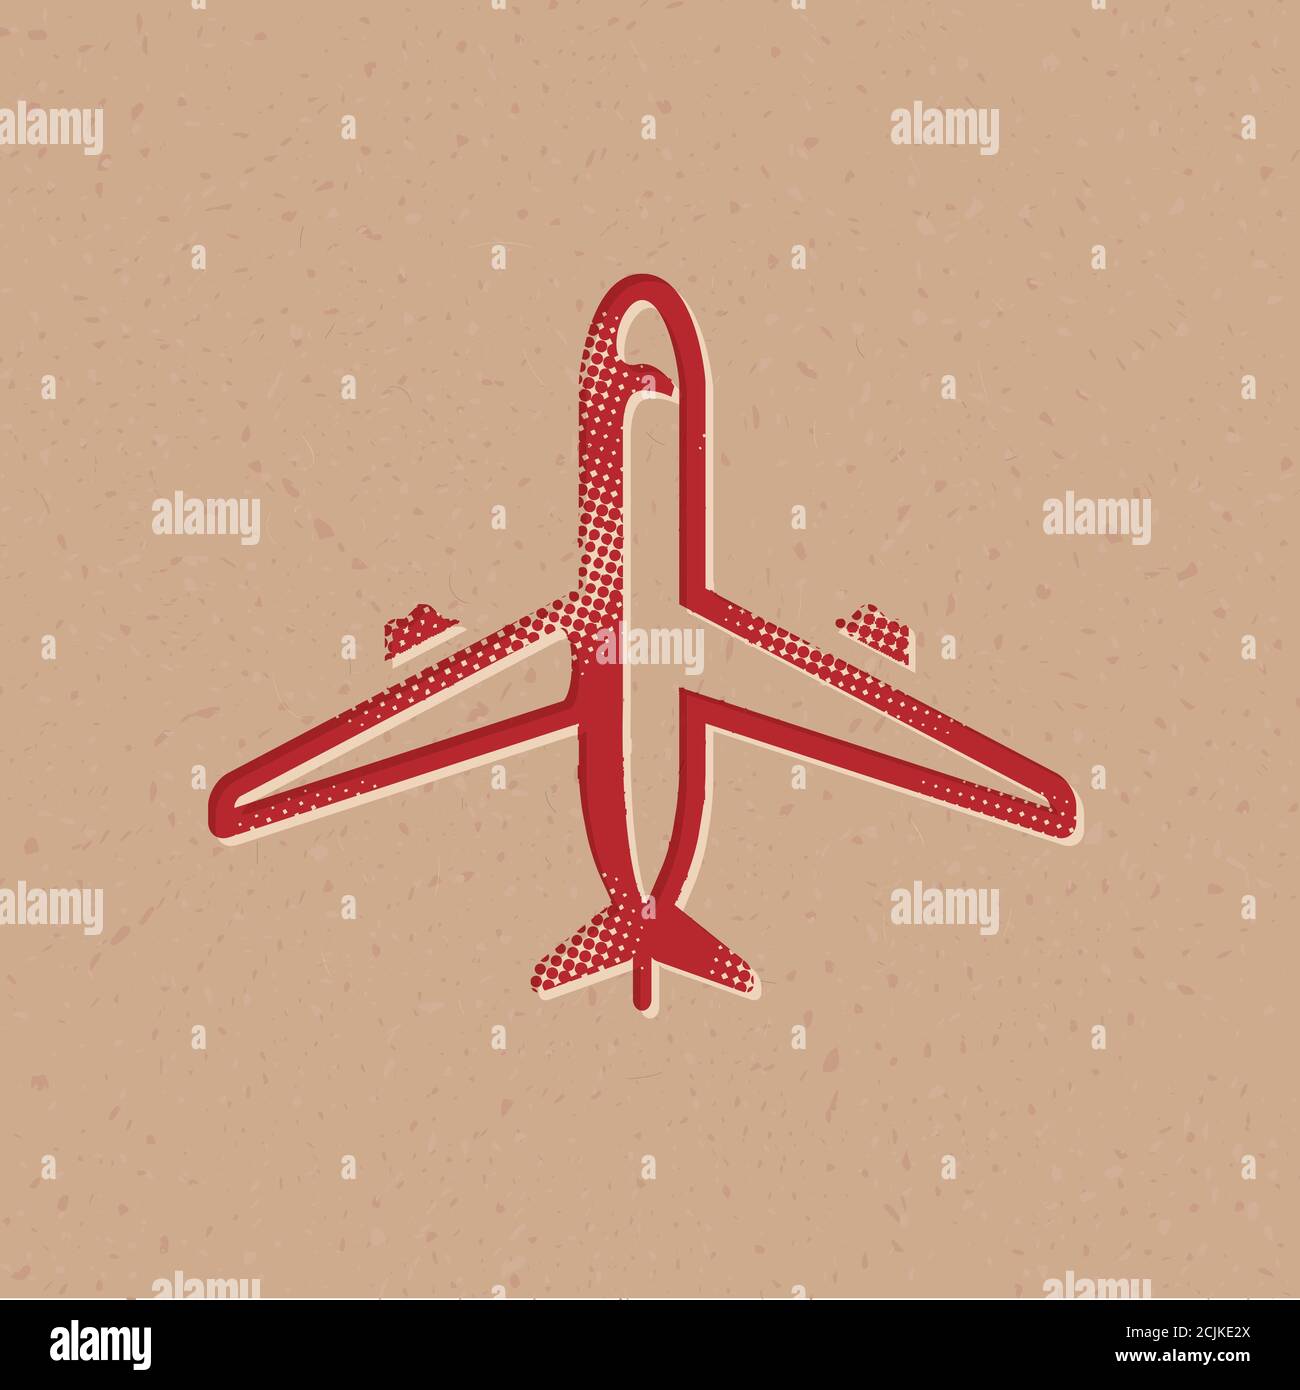 Airplane icon in halftone style. Grunge background vector illustration. Stock Vector